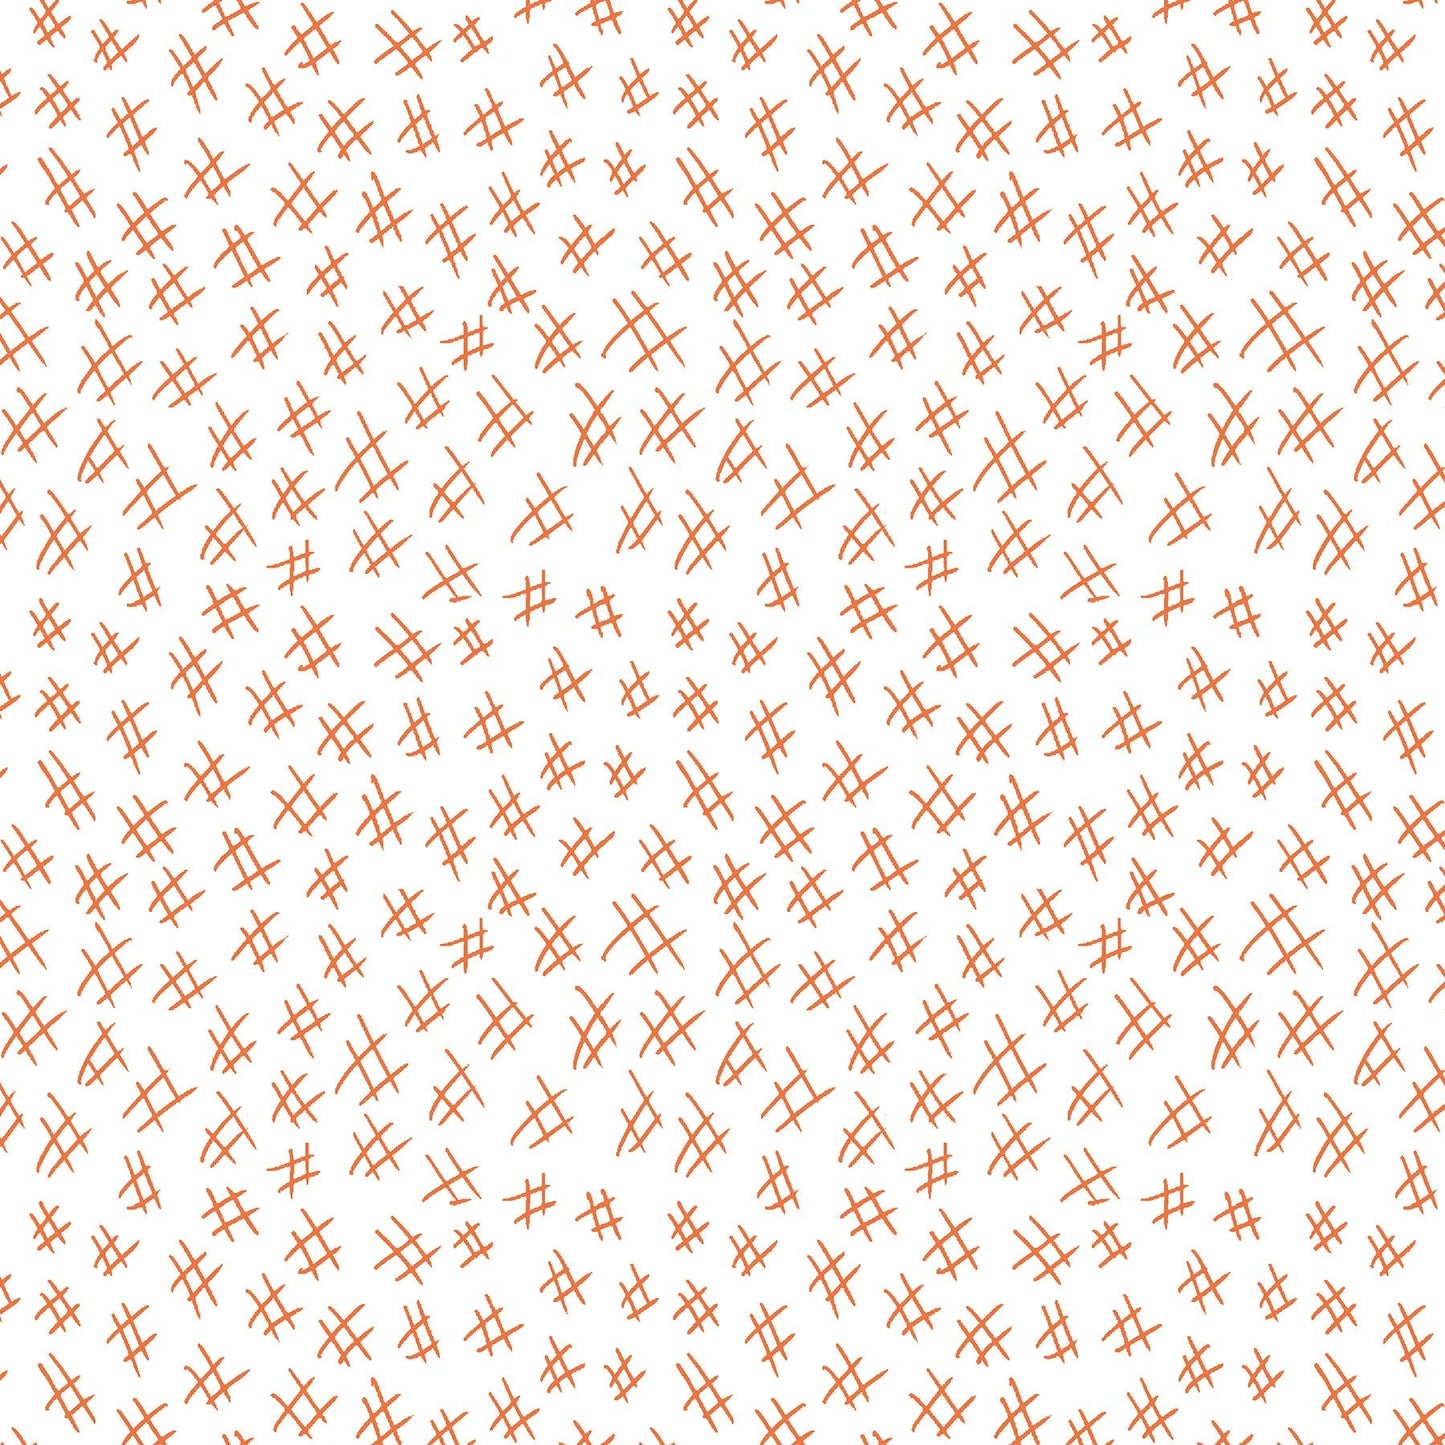  Hashtags in orange and white (13263-35)  is from Stitchy by Christa Watson for Benartex. The hashtags print features a white background with orange hashtags to provide a light tone for the collection and will serve well as a background fabric, a contrast fabric, or any where the eye needs to rest in your project.